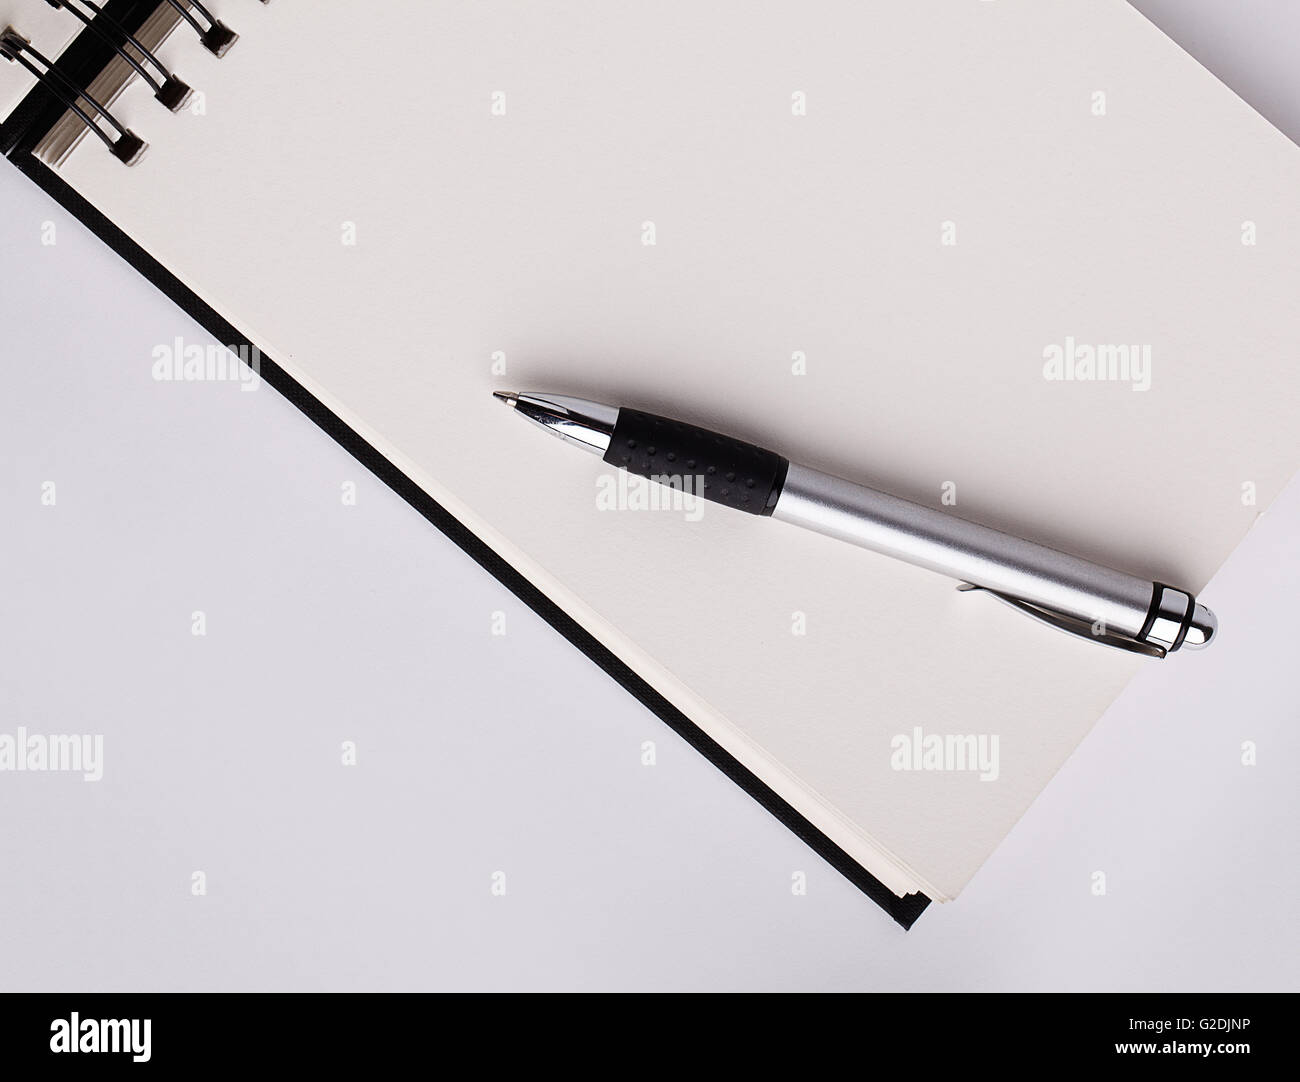 Metal ballpoint pen resting on an opened blank white notepad with copyspace for your message or text Stock Photo